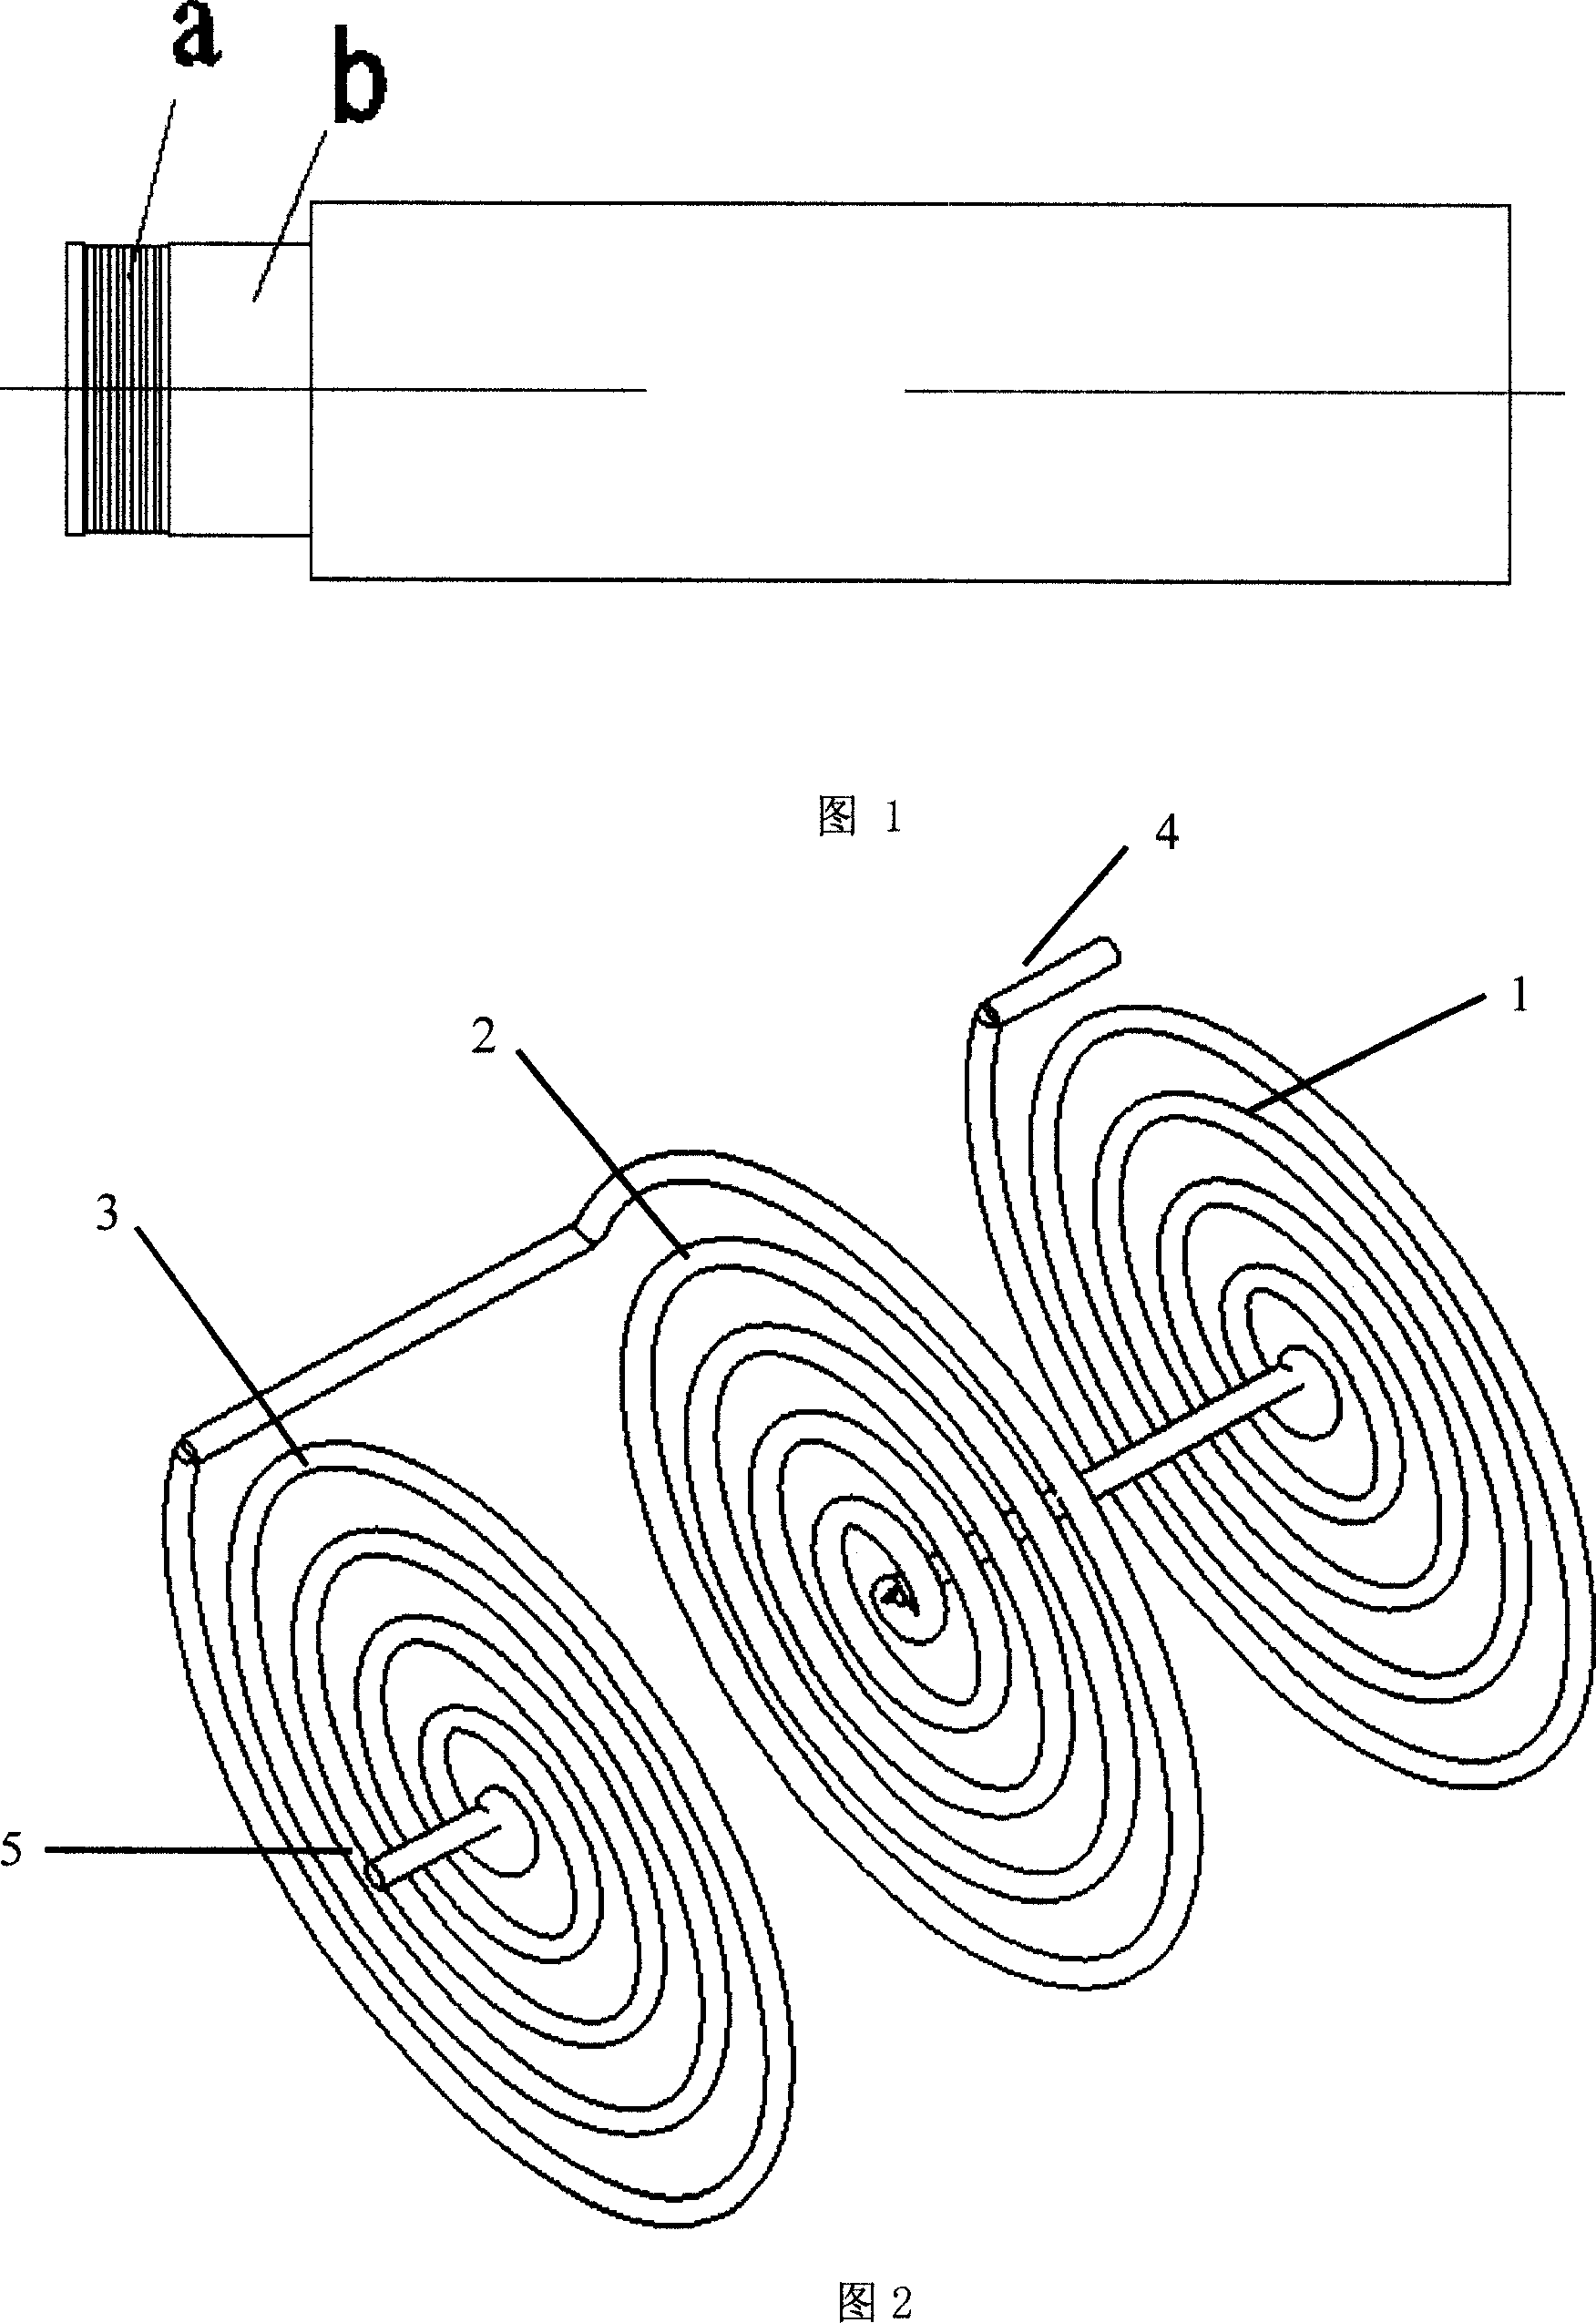 Process for producing inductive coil by printed circuit board